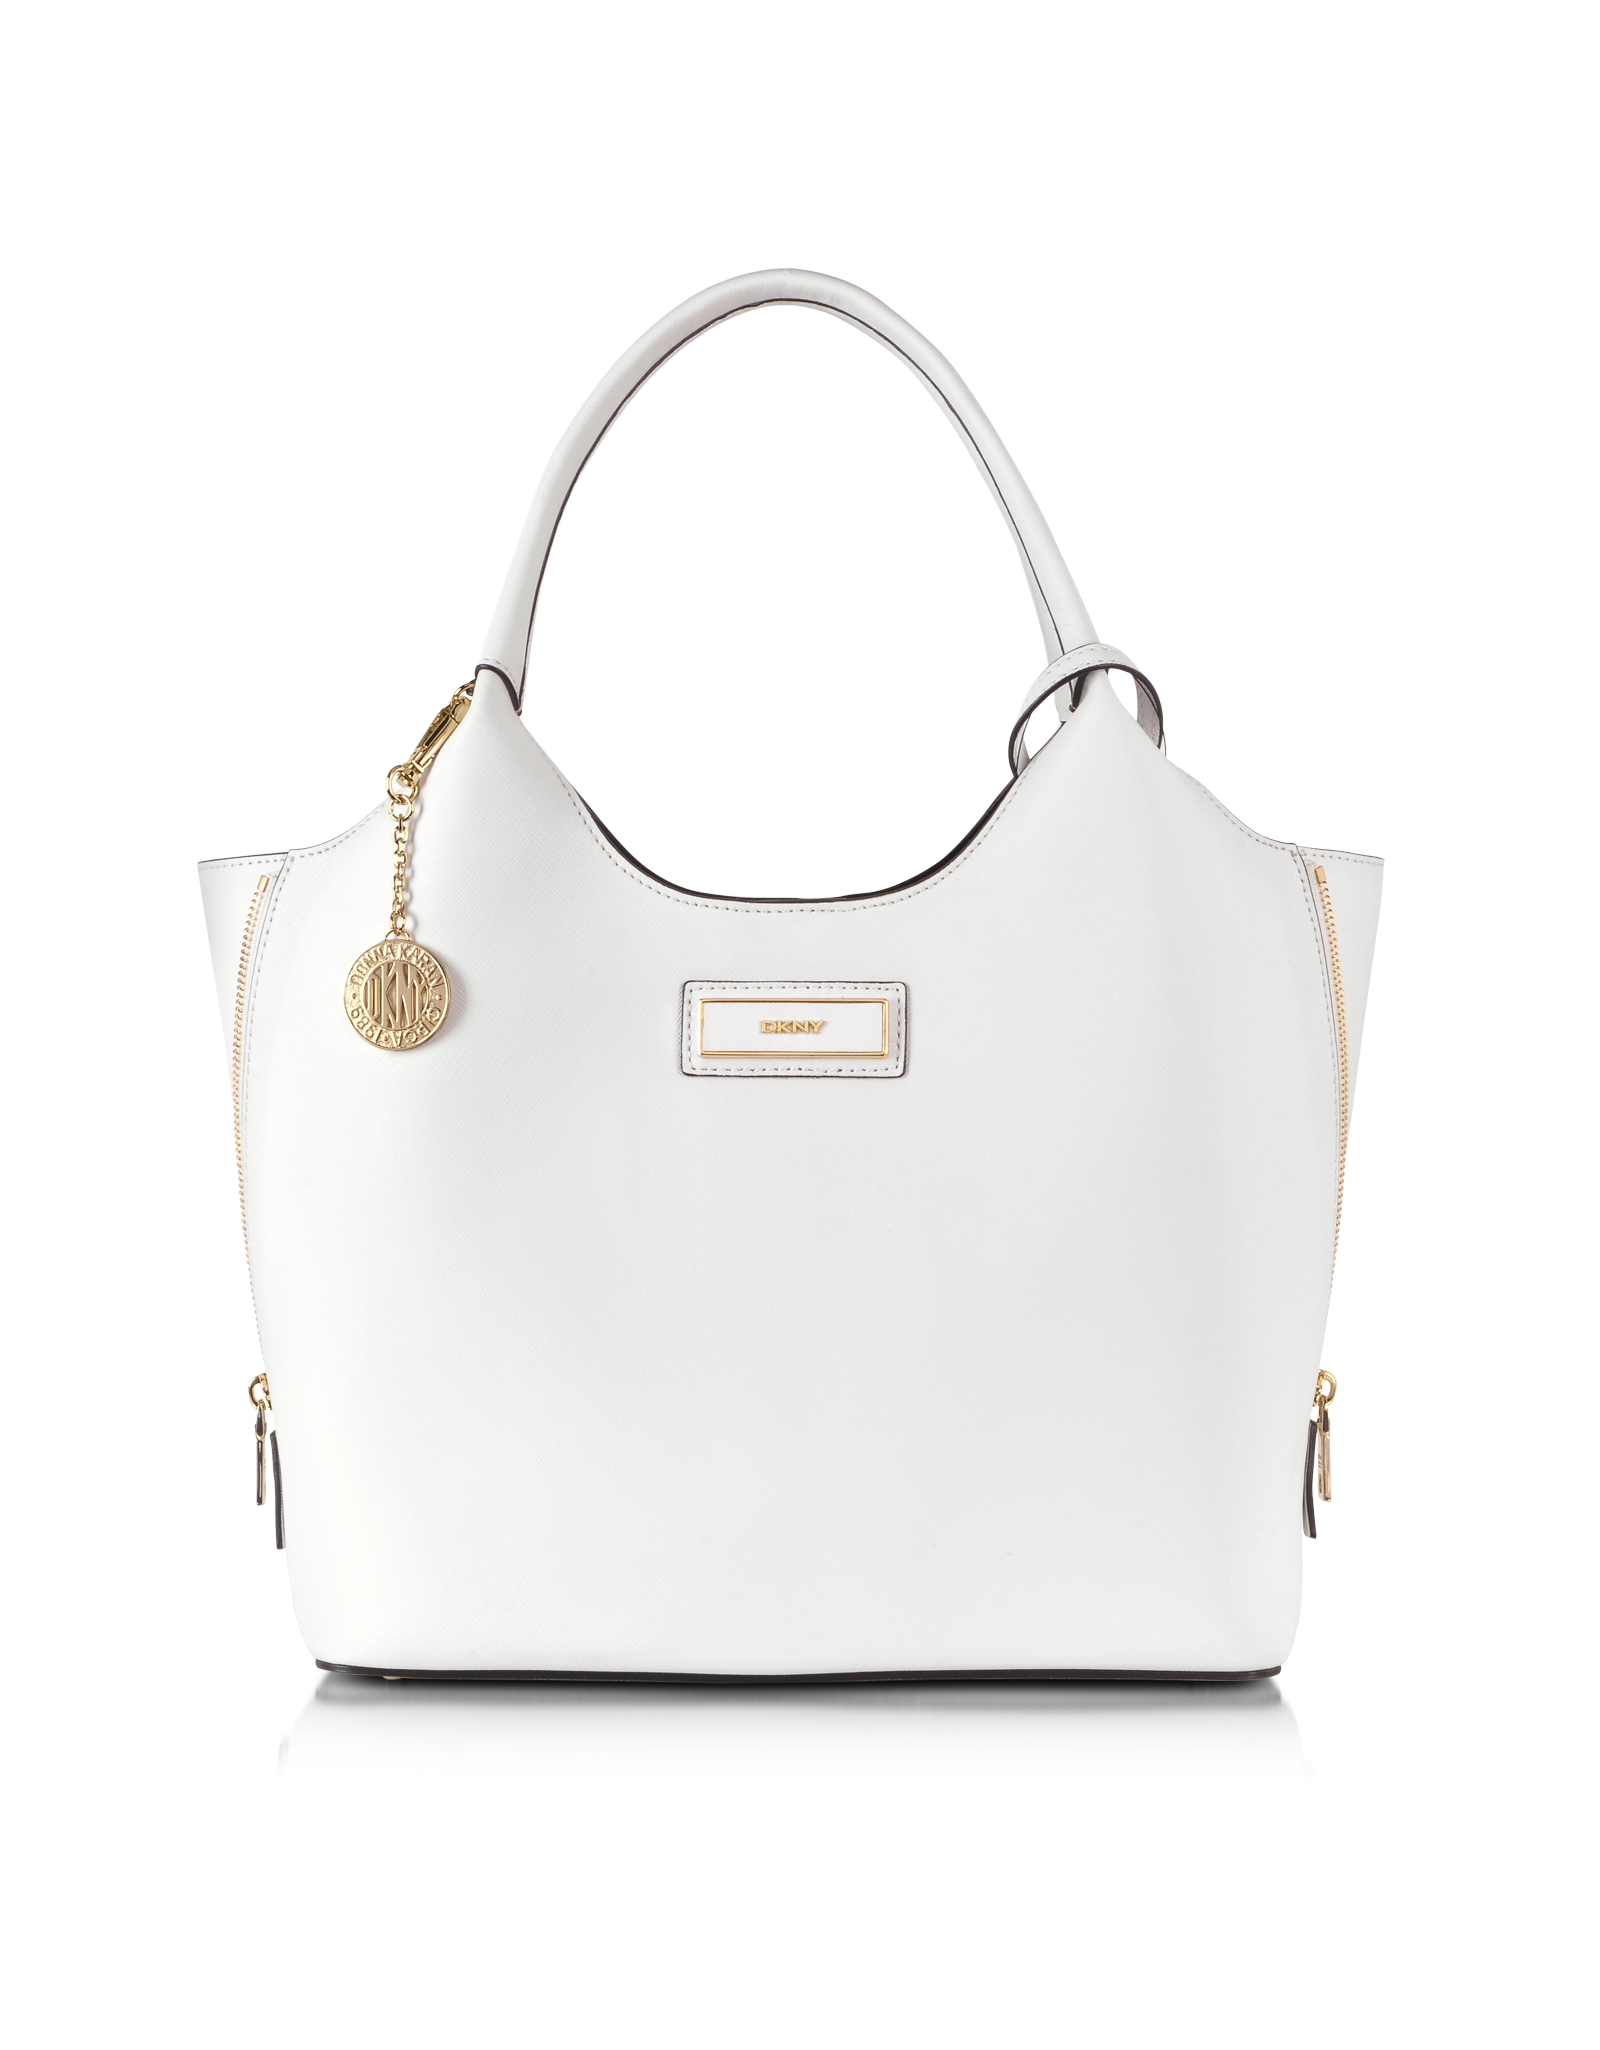 Dkny Bryant Park Saffiano Leather Zip Tote in White | Lyst